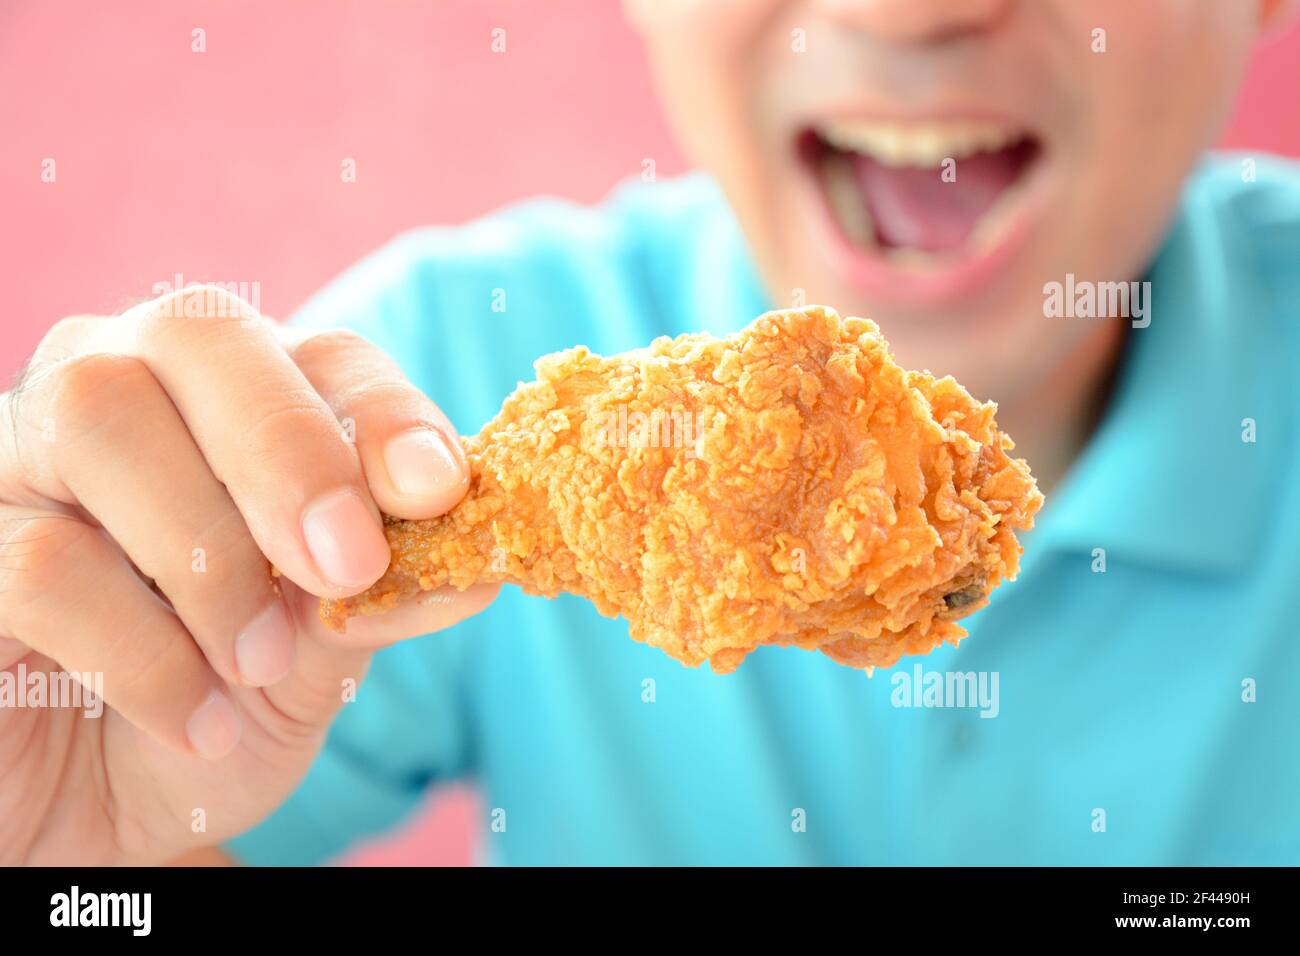 A man with opening mouth about to eat deep fried chicken leg or drumstick Stock Photo